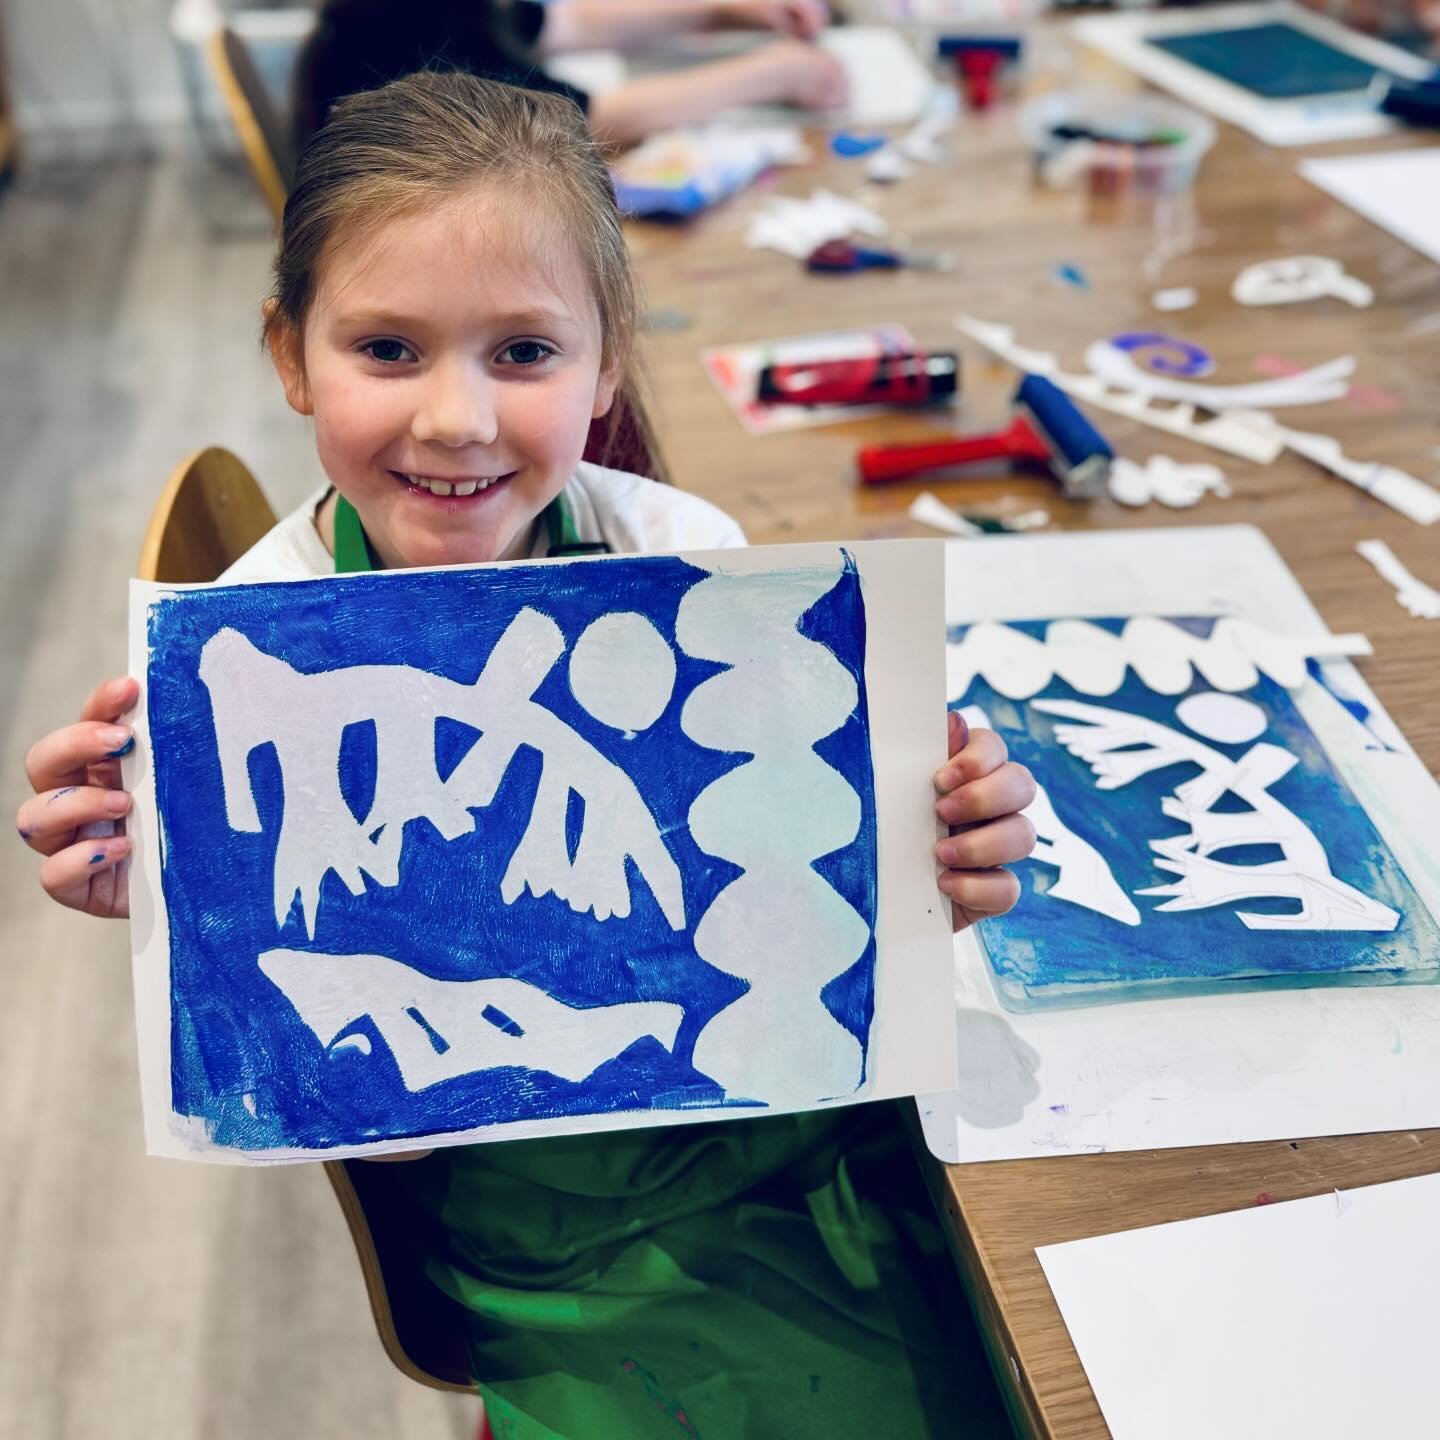 Shapes and Gelli Printng! 😍

This week we have had fun experimenting with Gelli printing; exploring shape, colour and composition.

Our lovely students looked for simple shapes within images of plants and flowers before drawing the shapes onto card.